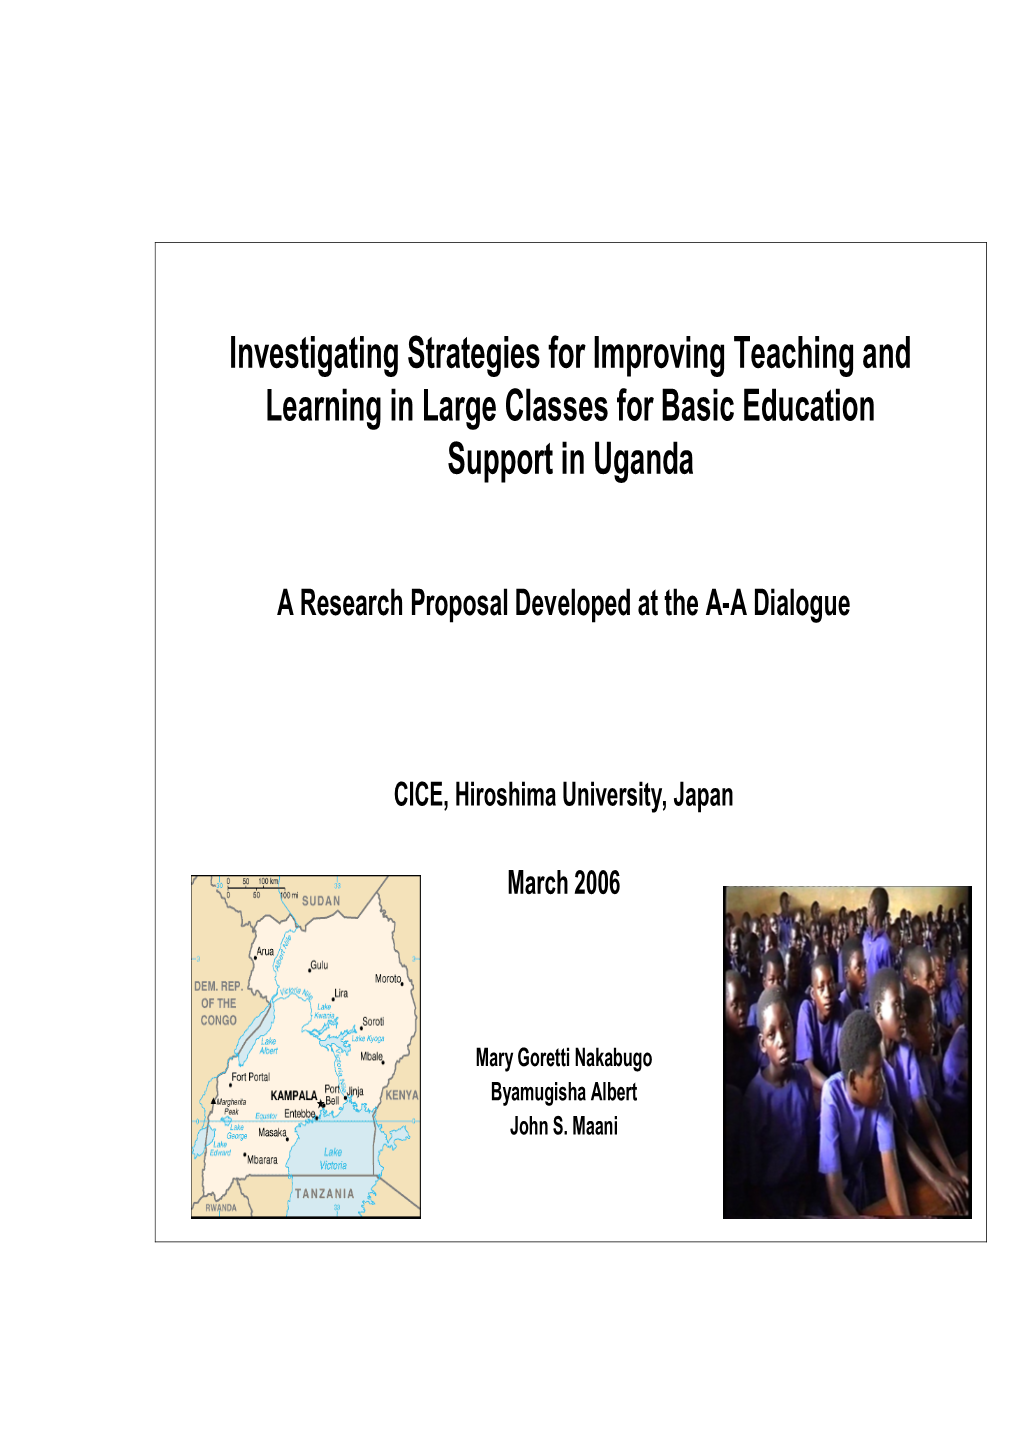 Investigating Strategies for Improving Teaching and Learning in Large Classes for Basic